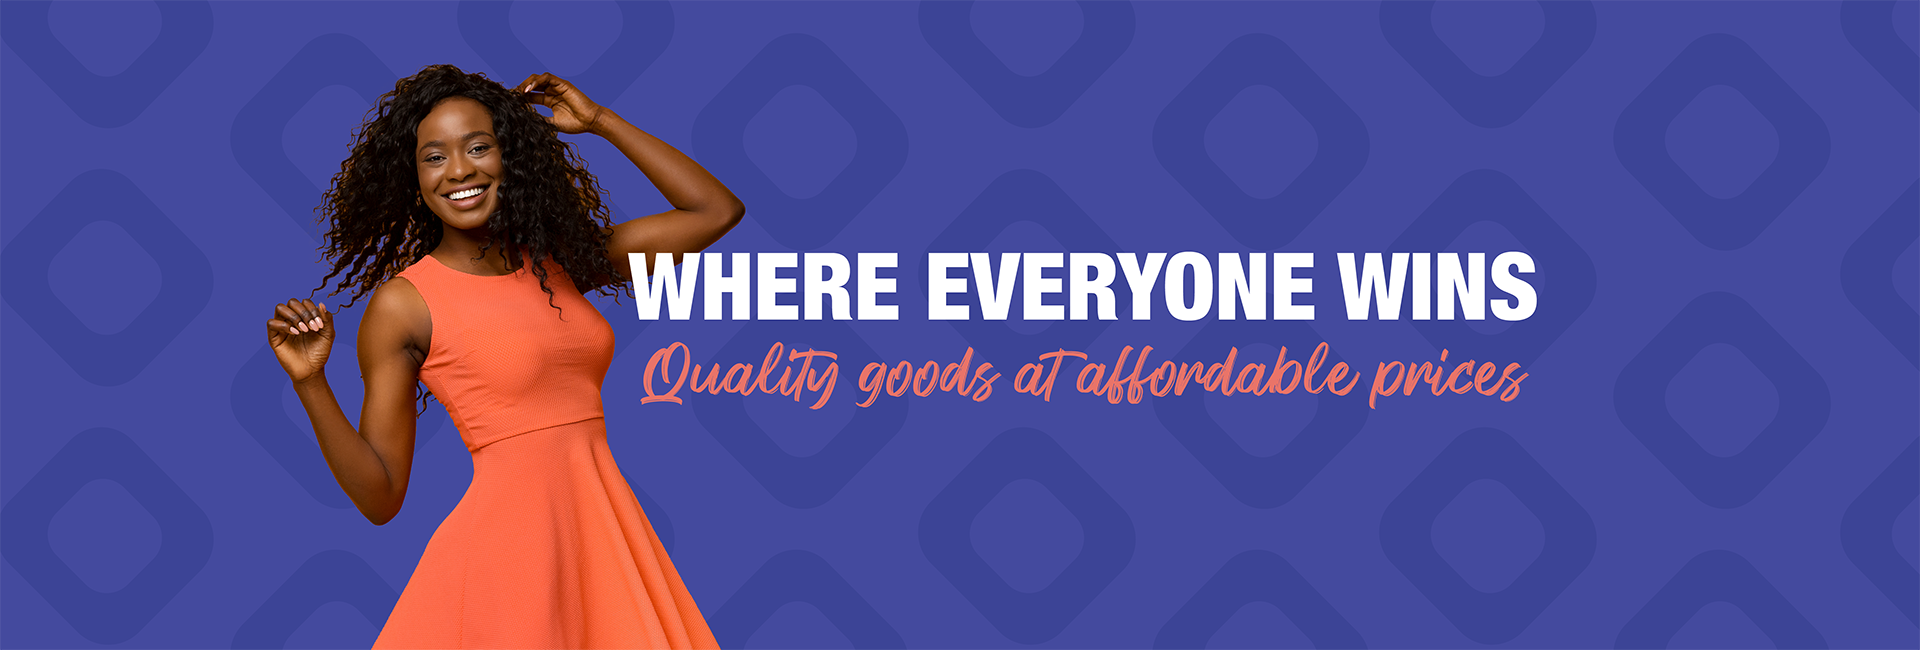 Banner with blue background and photo of smiling woman wearing a coral dress. Text says "Where everyone wins" "Quality goods at affordable prices".